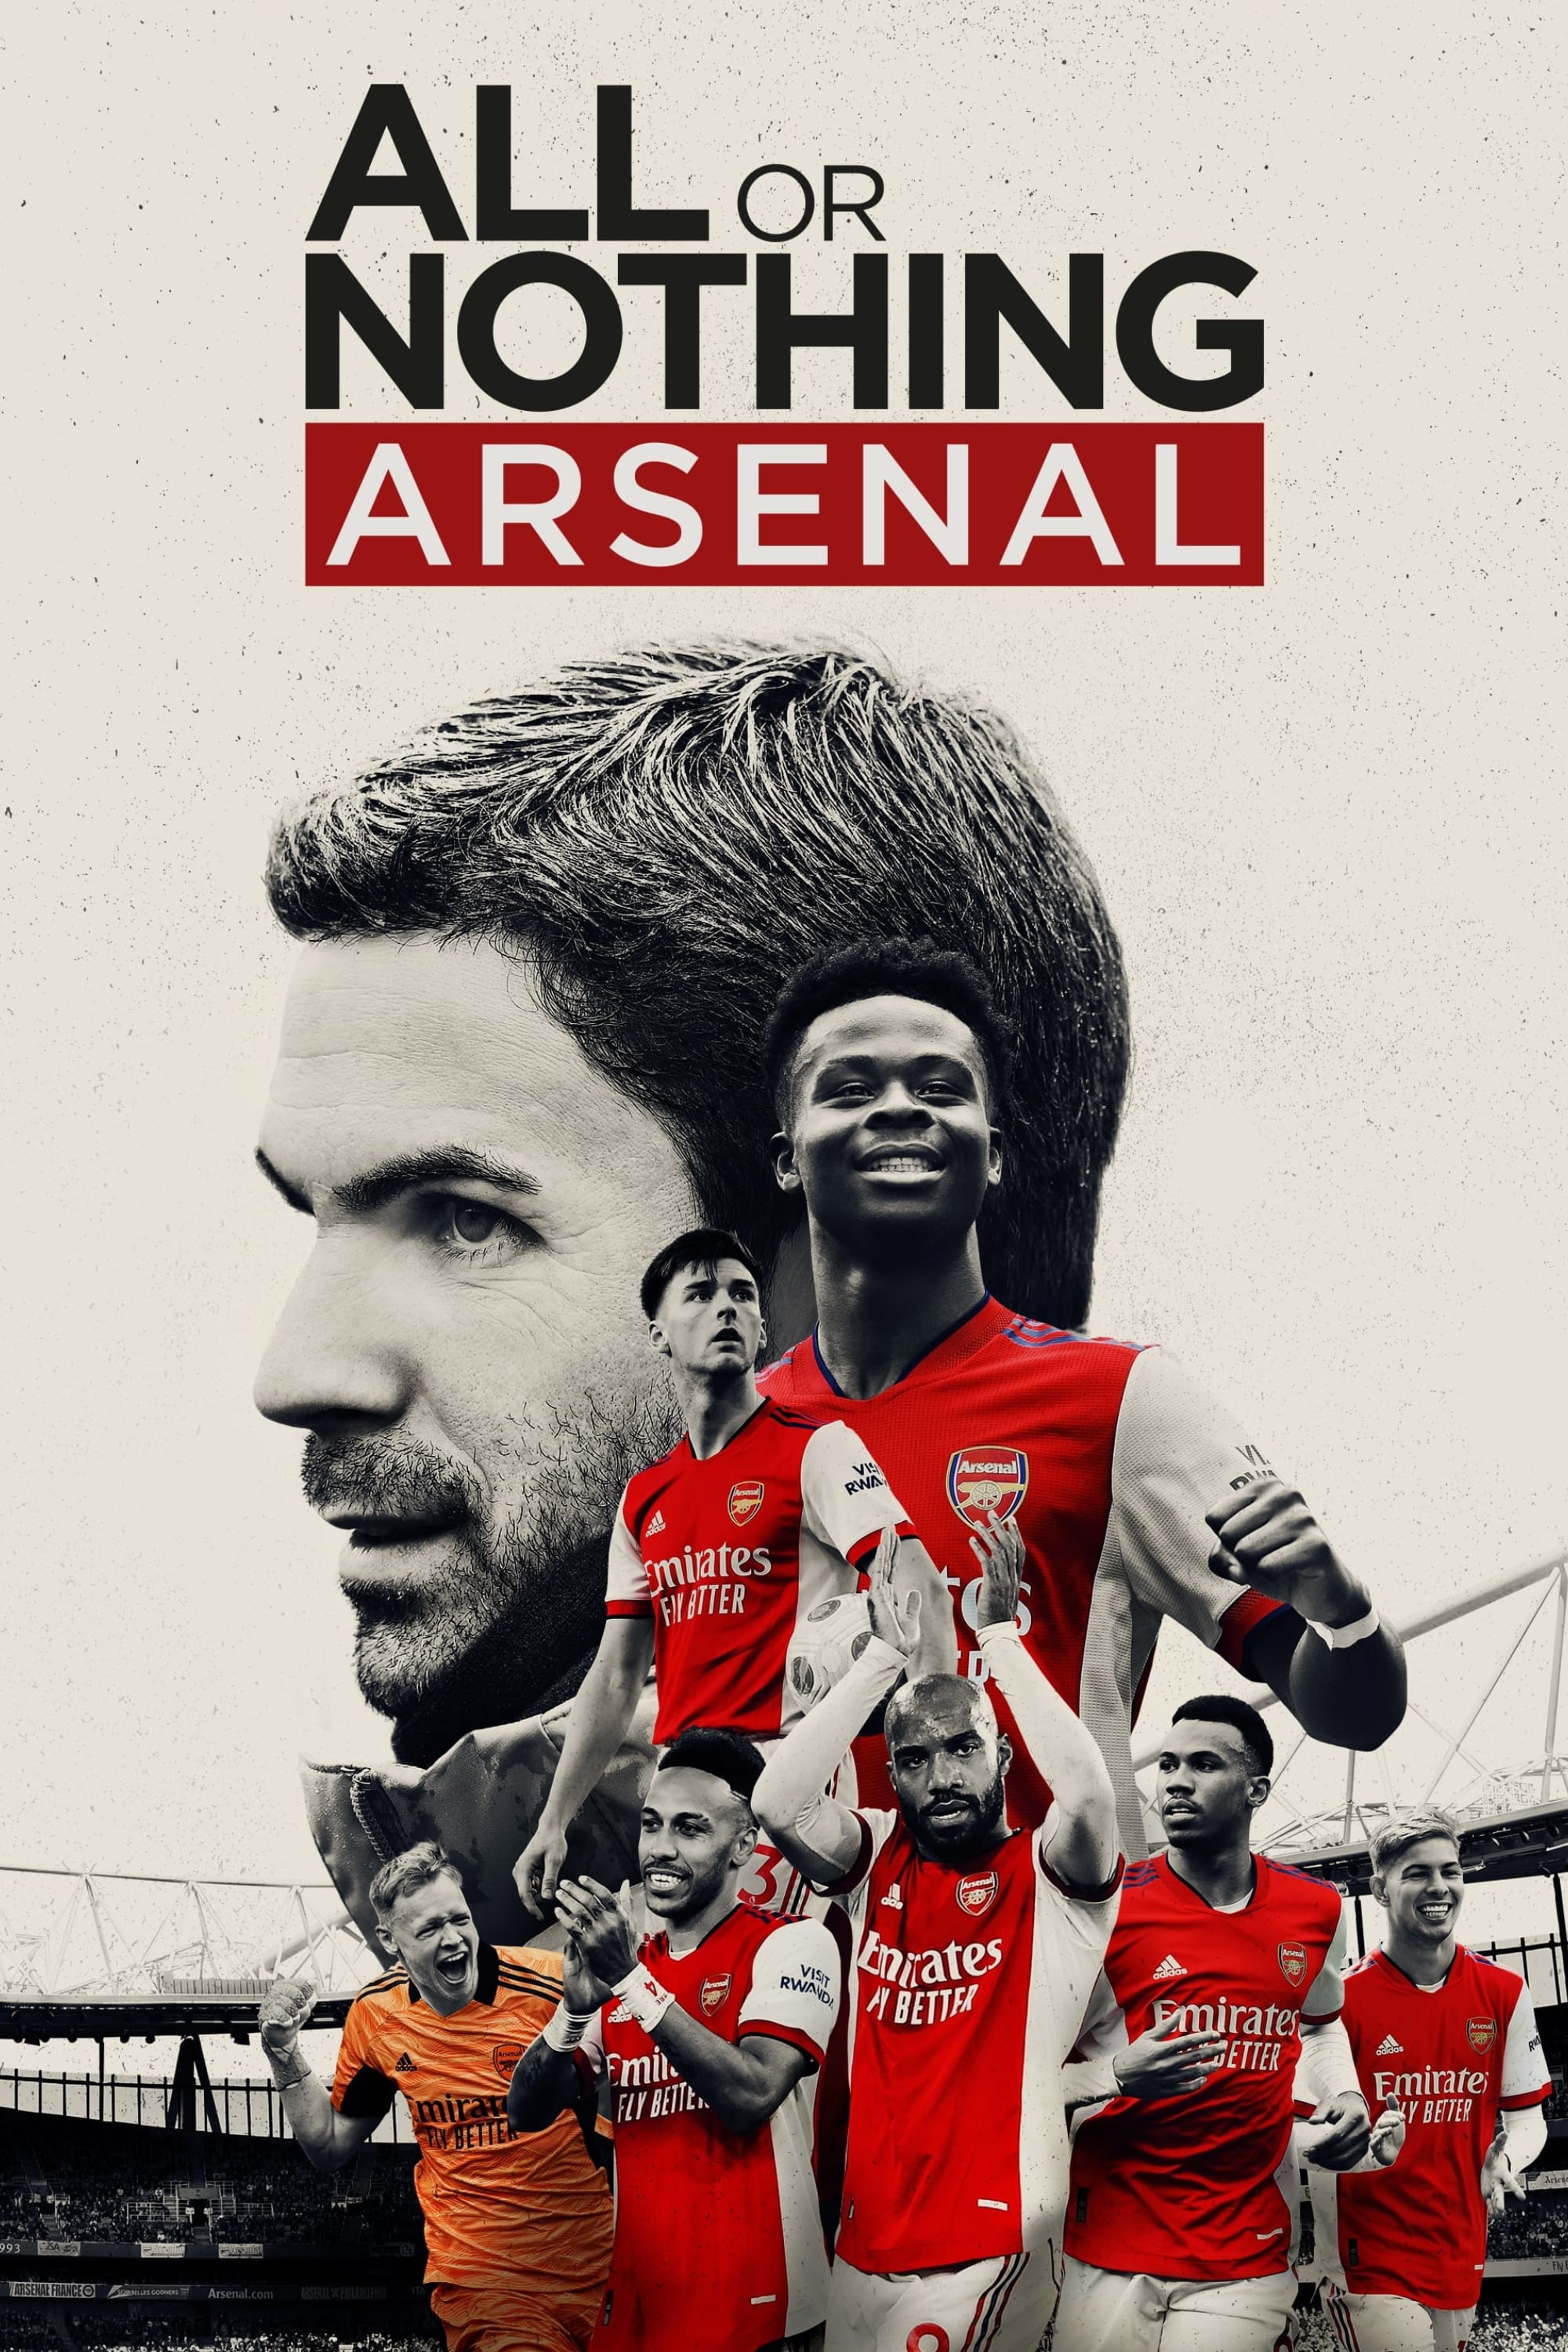 Caratula de All or Nothing: Arsenal (All or Nothing: Arsenal) 